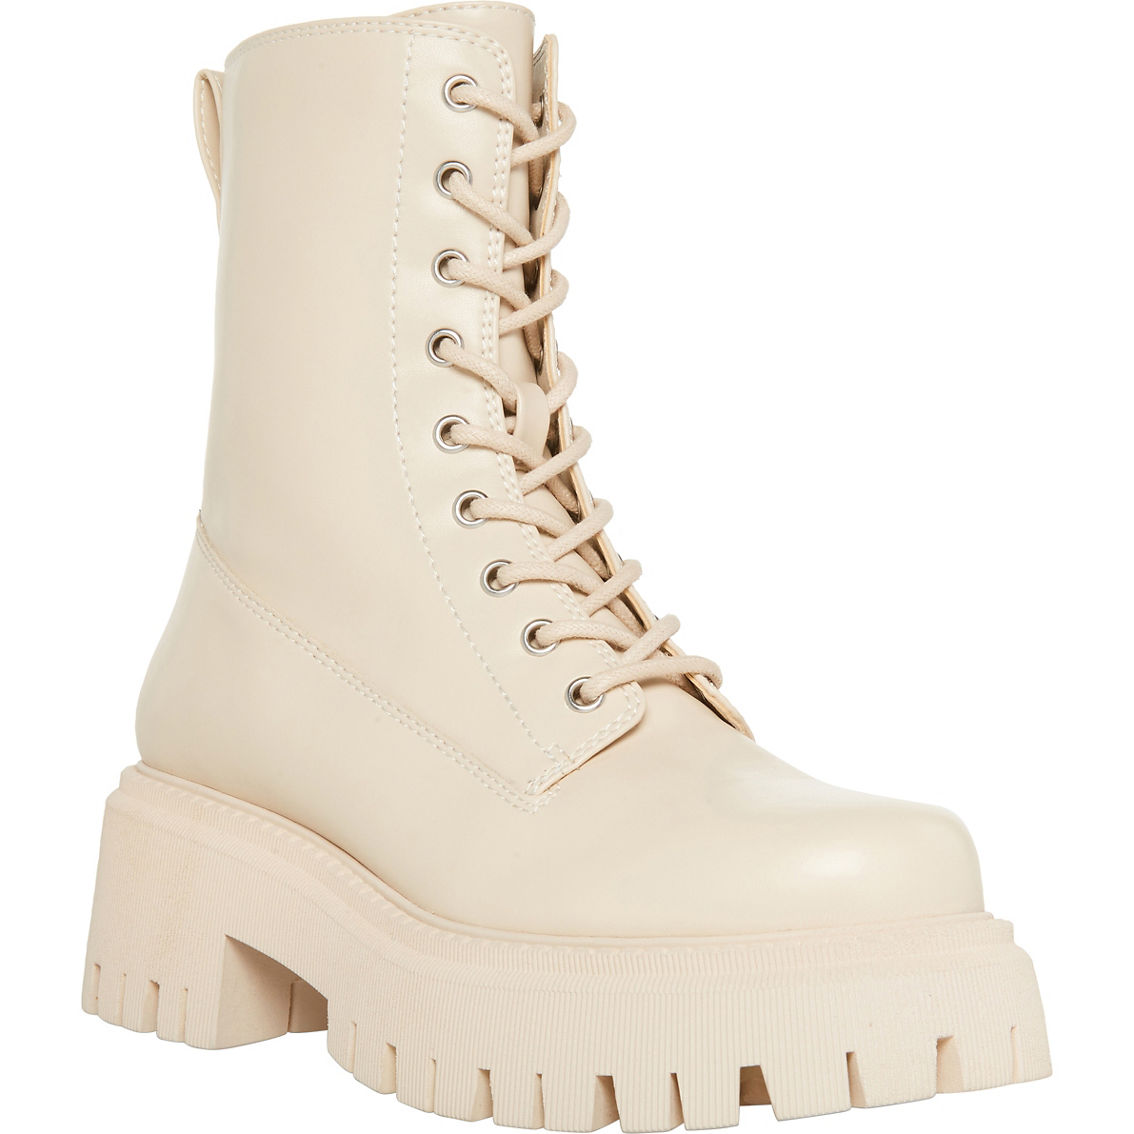 Madden Girls Knight Boots | Boots | Shoes | Shop The Exchange